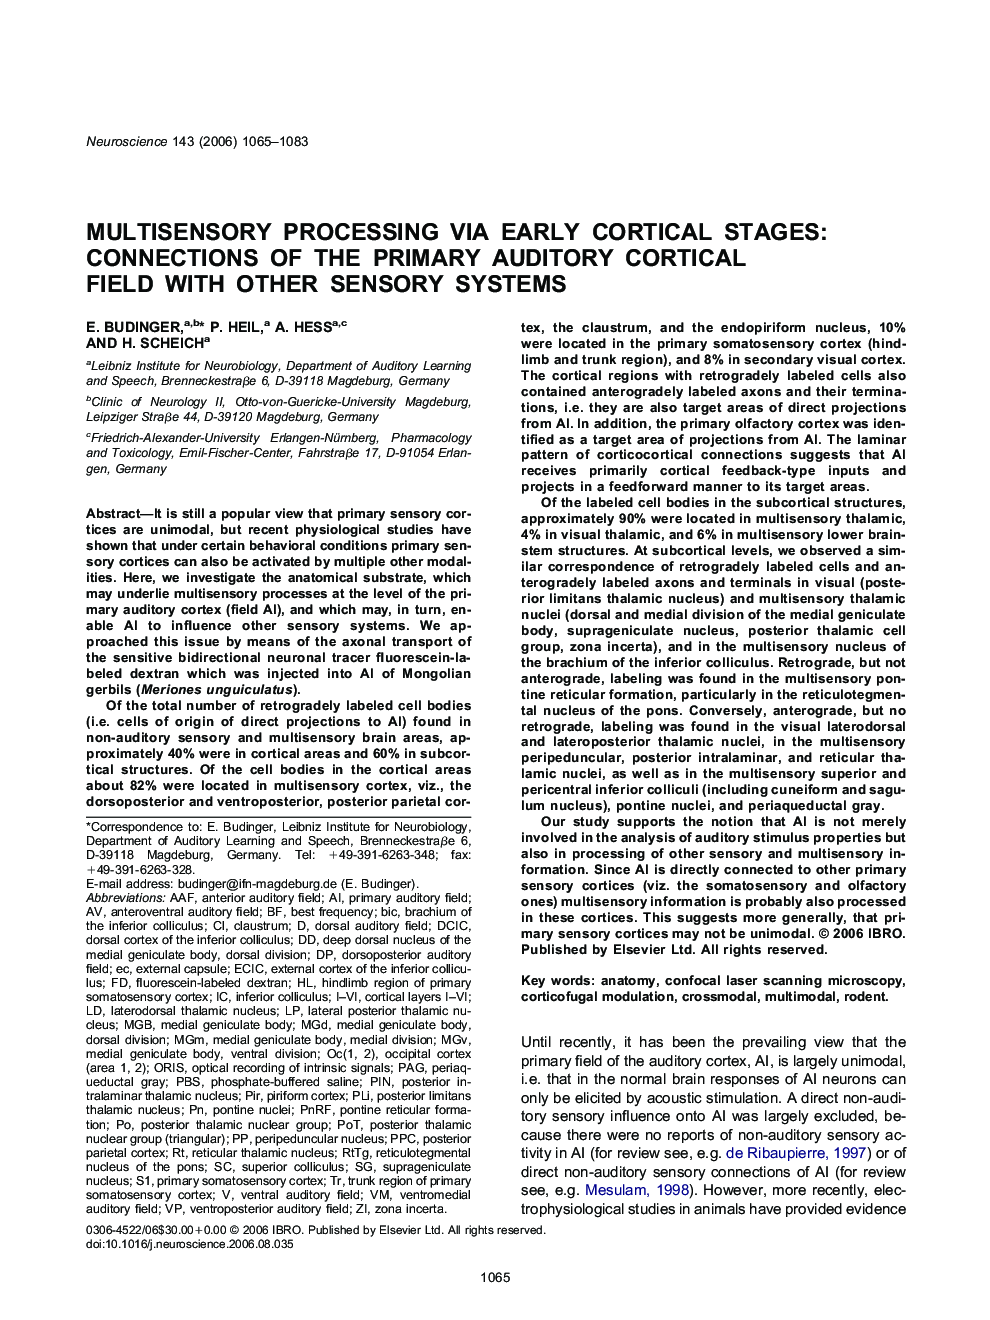 Multisensory processing via early cortical stages: Connections of the primary auditory cortical field with other sensory systems